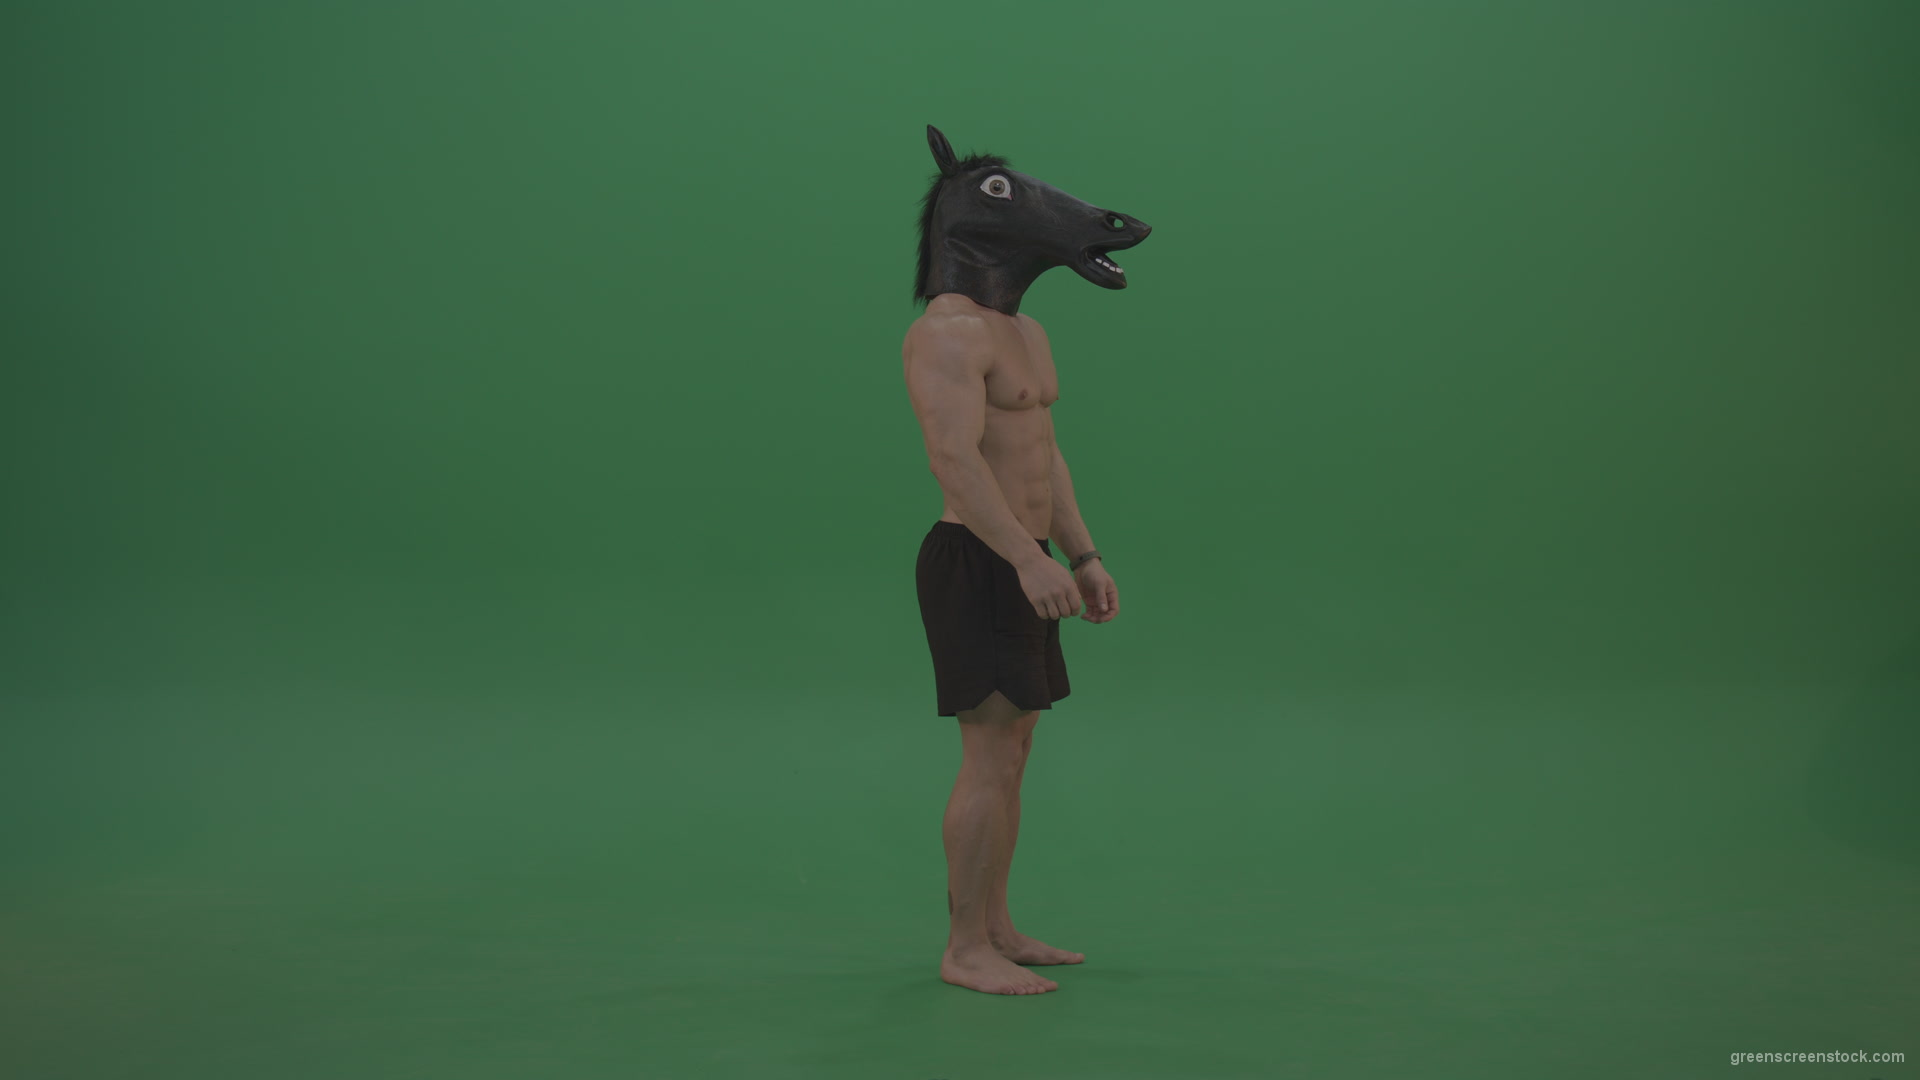 Ripped-man-with-horse-head-displays-body-over-chromakey-background_004 Green Screen Stock